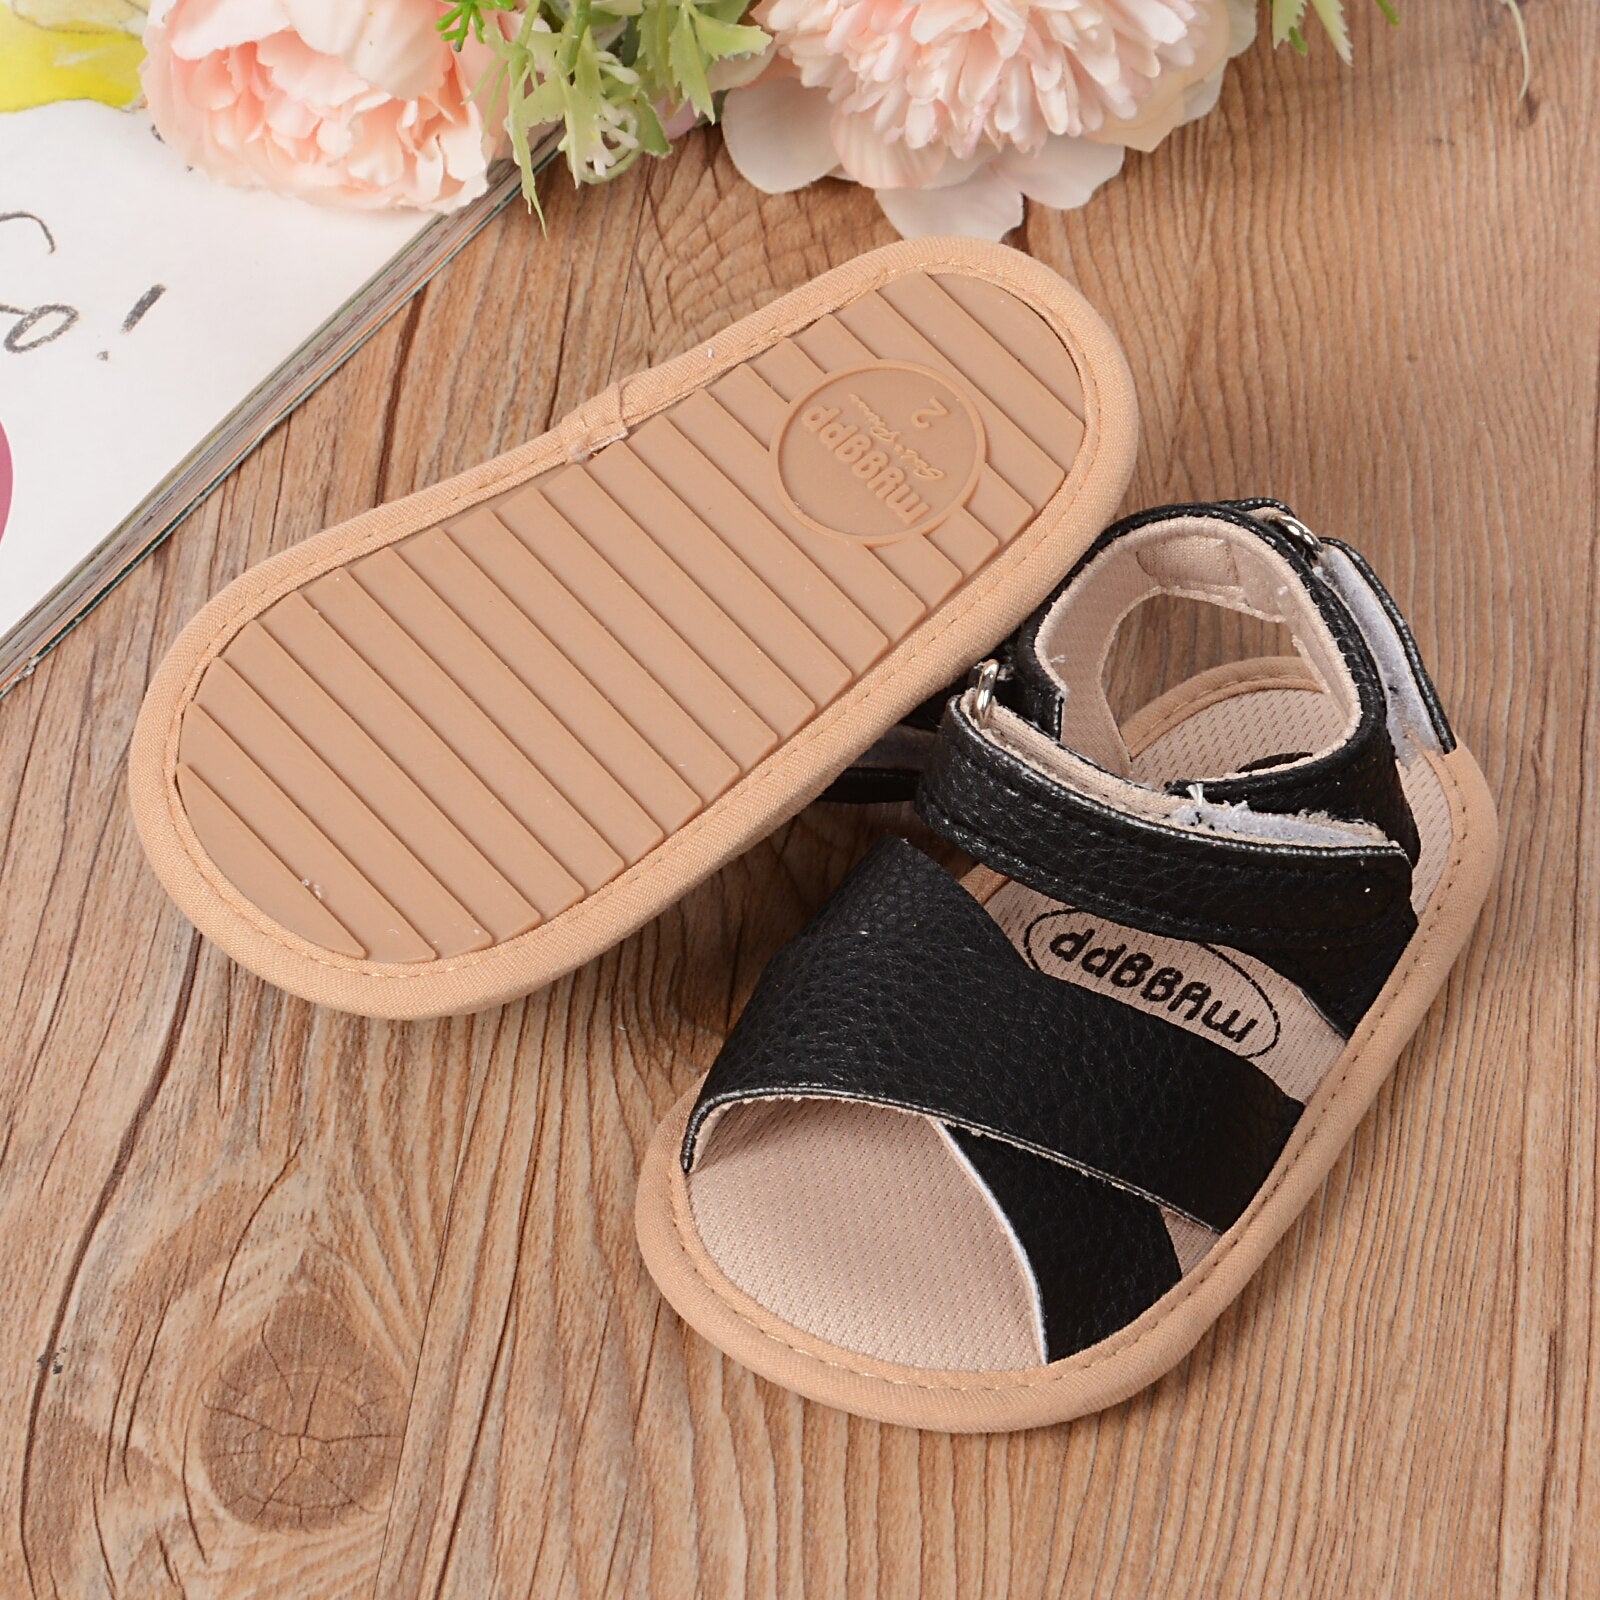 Calsunbaby Infants Baby Boys Girls Leather Sandals Newborn Anti-Slip Soft  Sole House Flat Shoes with Cross Strap - Walmart.com